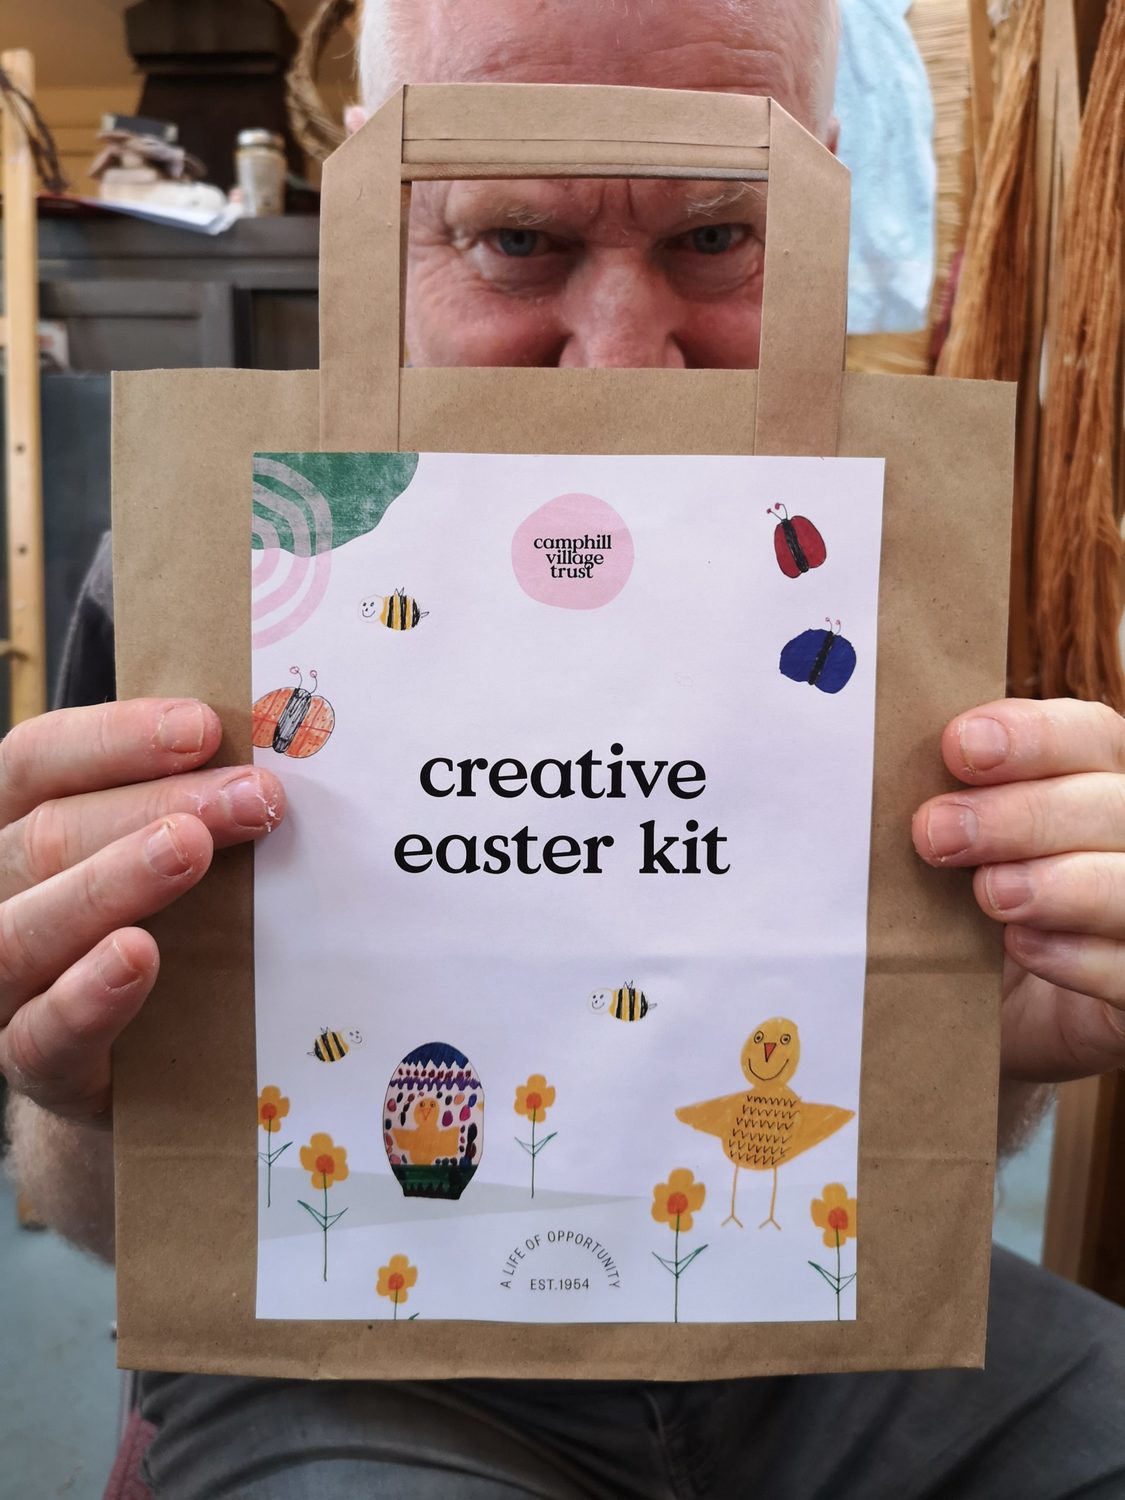 Get creative this Easter